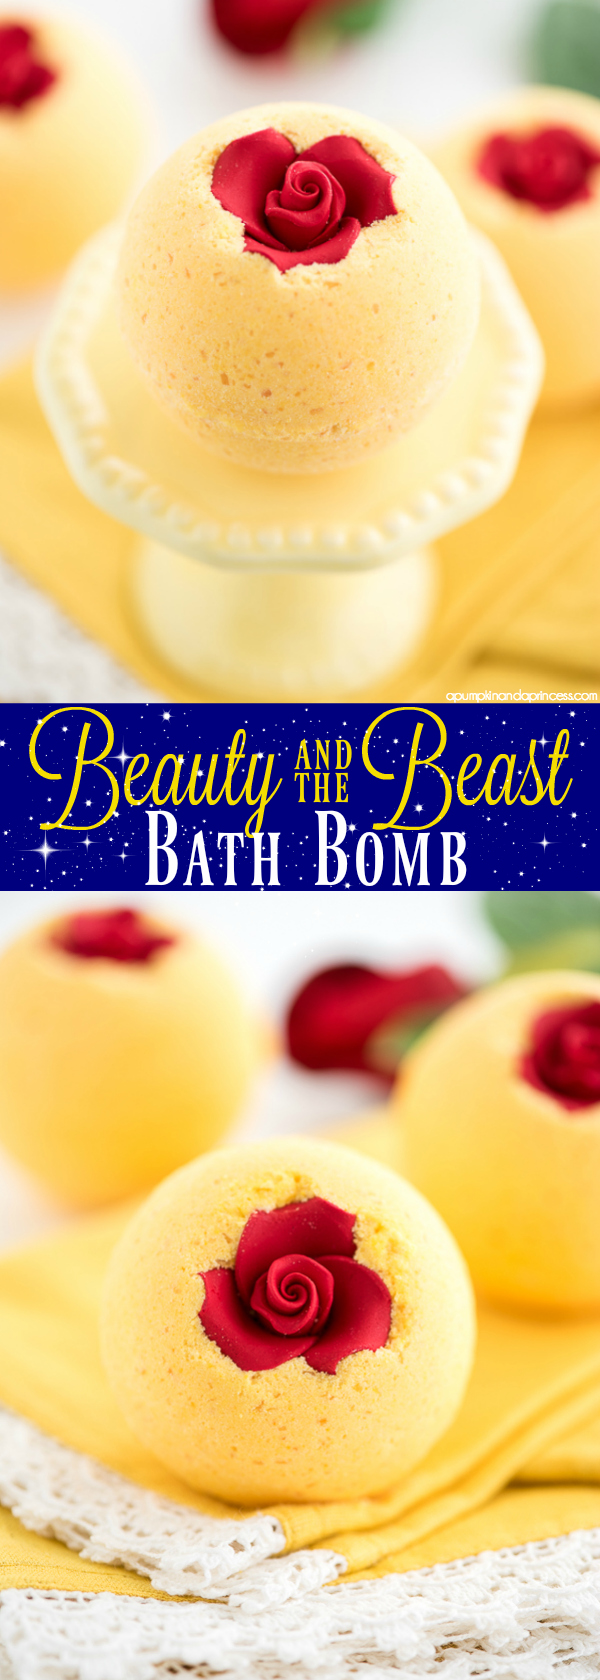 DIY Beauty and the Beast bath bomb – how to make bath bombs inspired by Beauty & the beast and the enchanted rose.